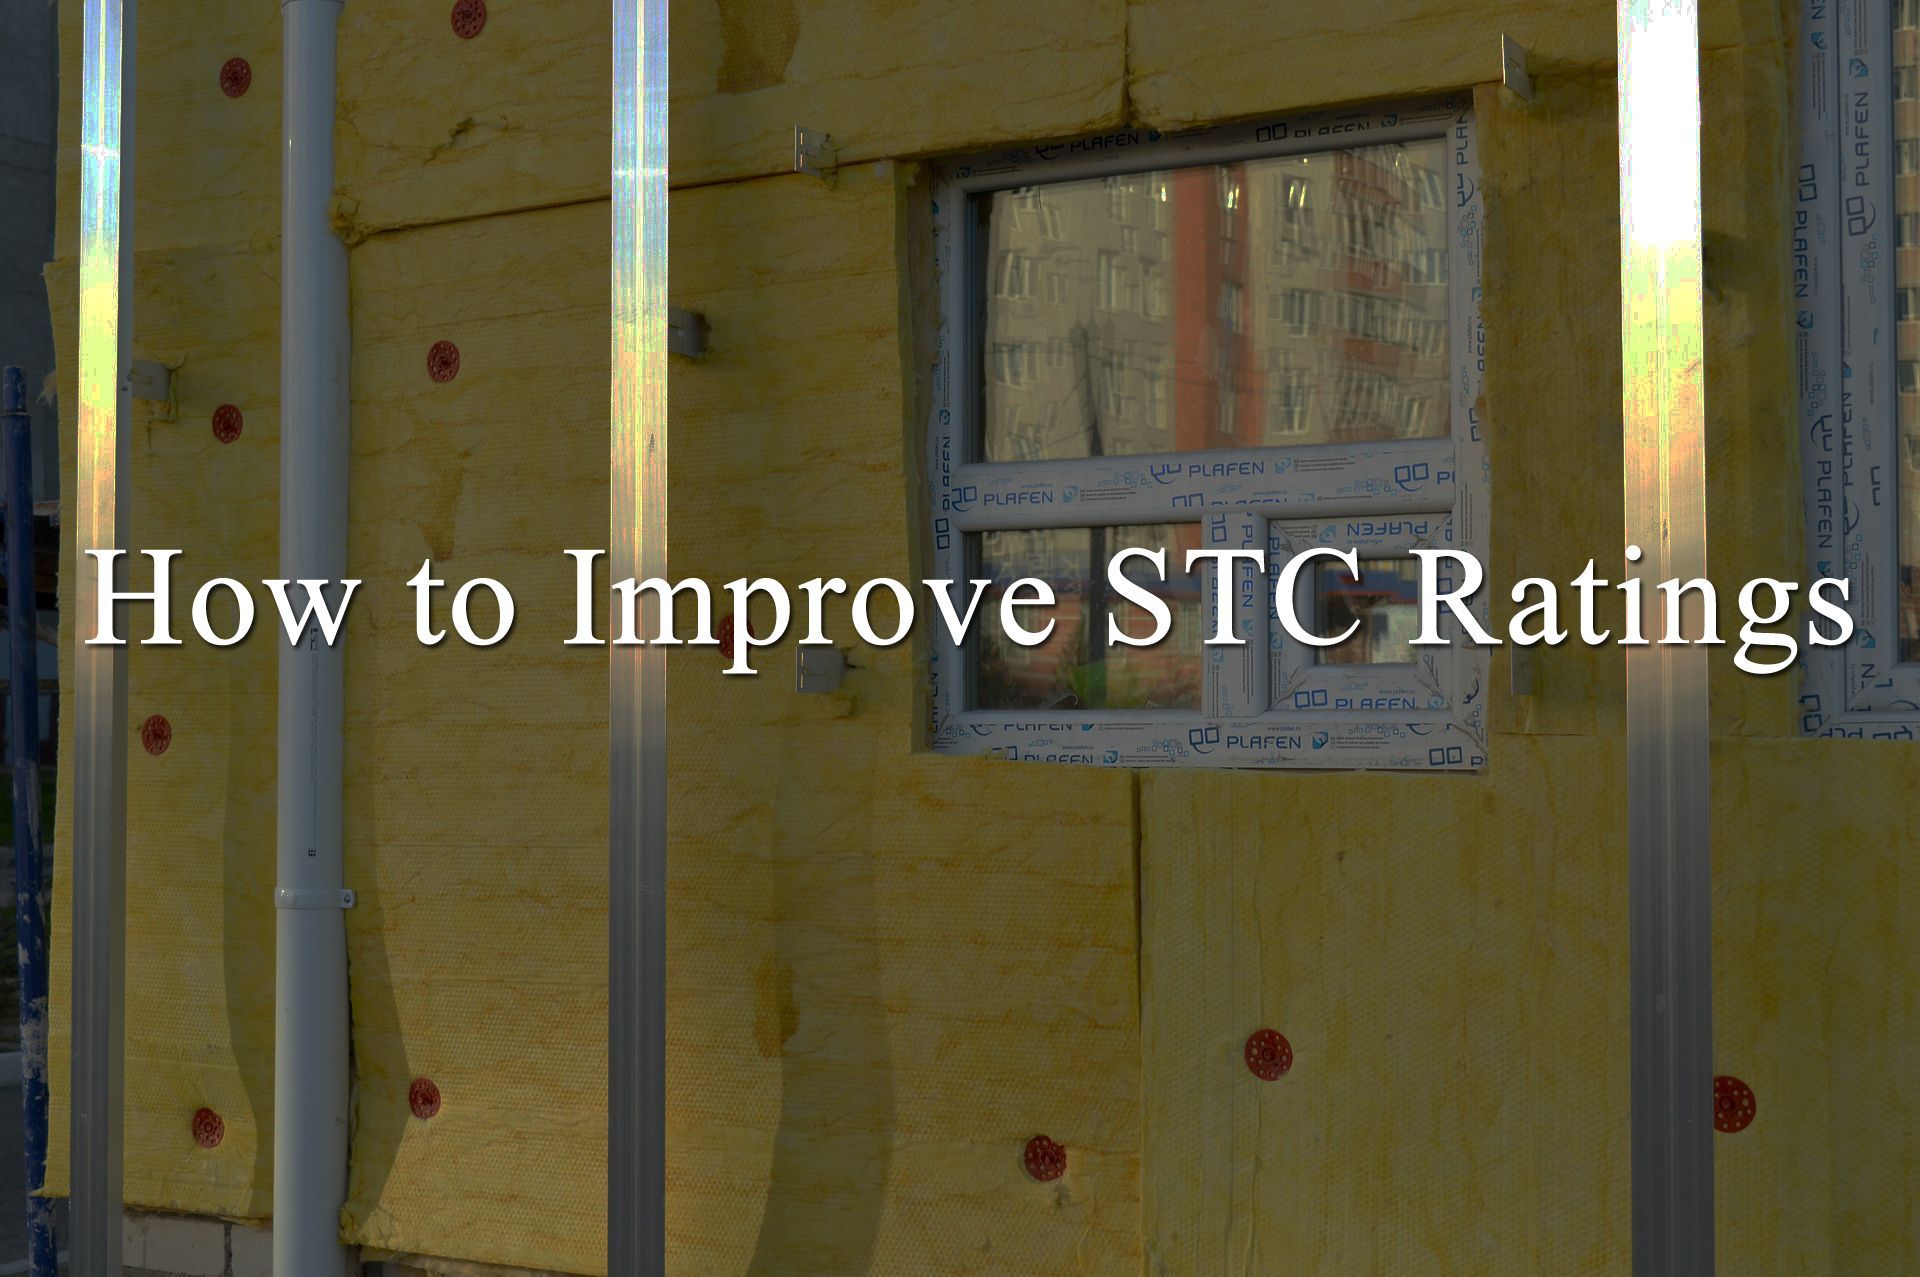 5 ways to improve STC Ratings of wall